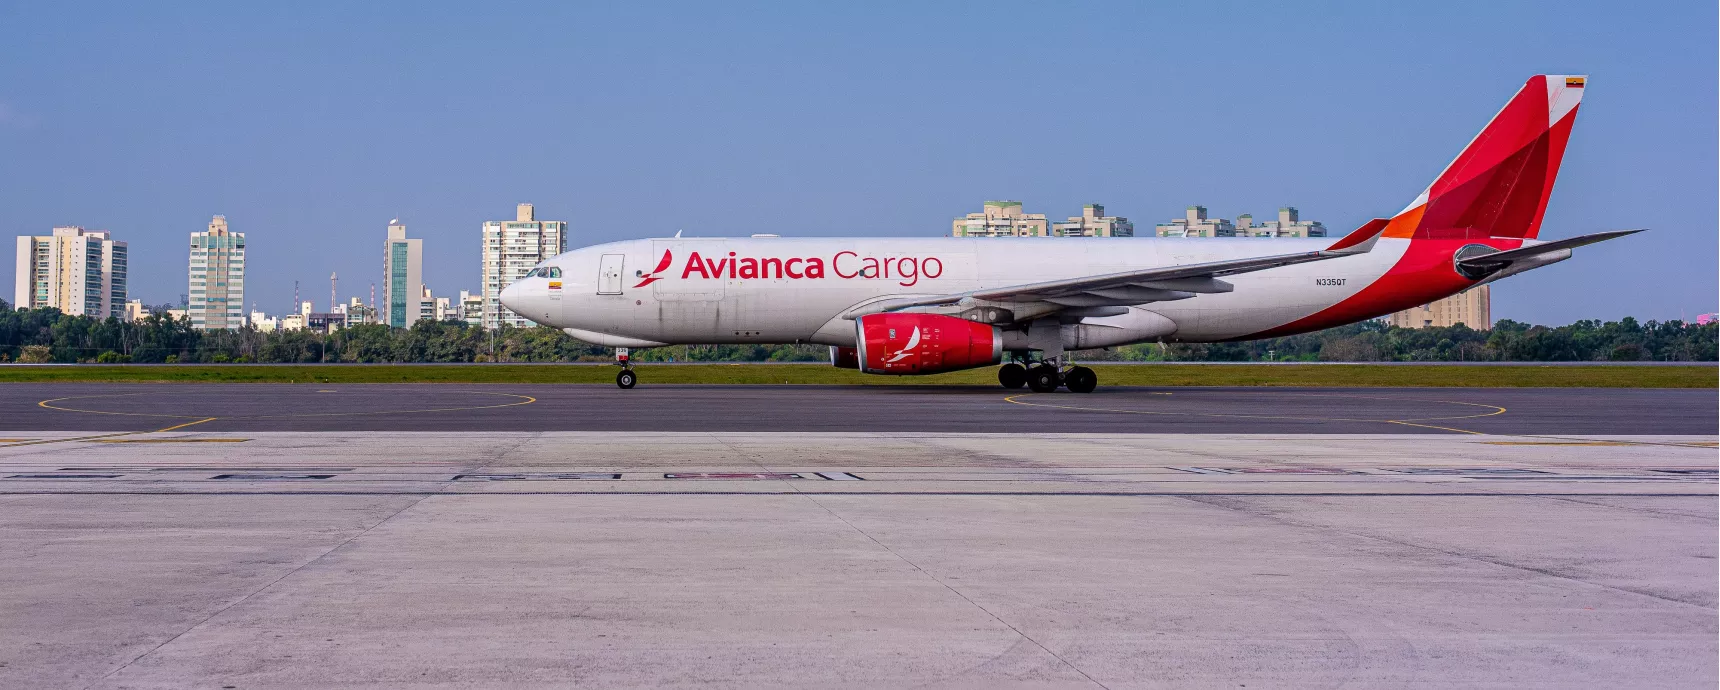 Route operated by Avianca Cargo debuts in Vitória